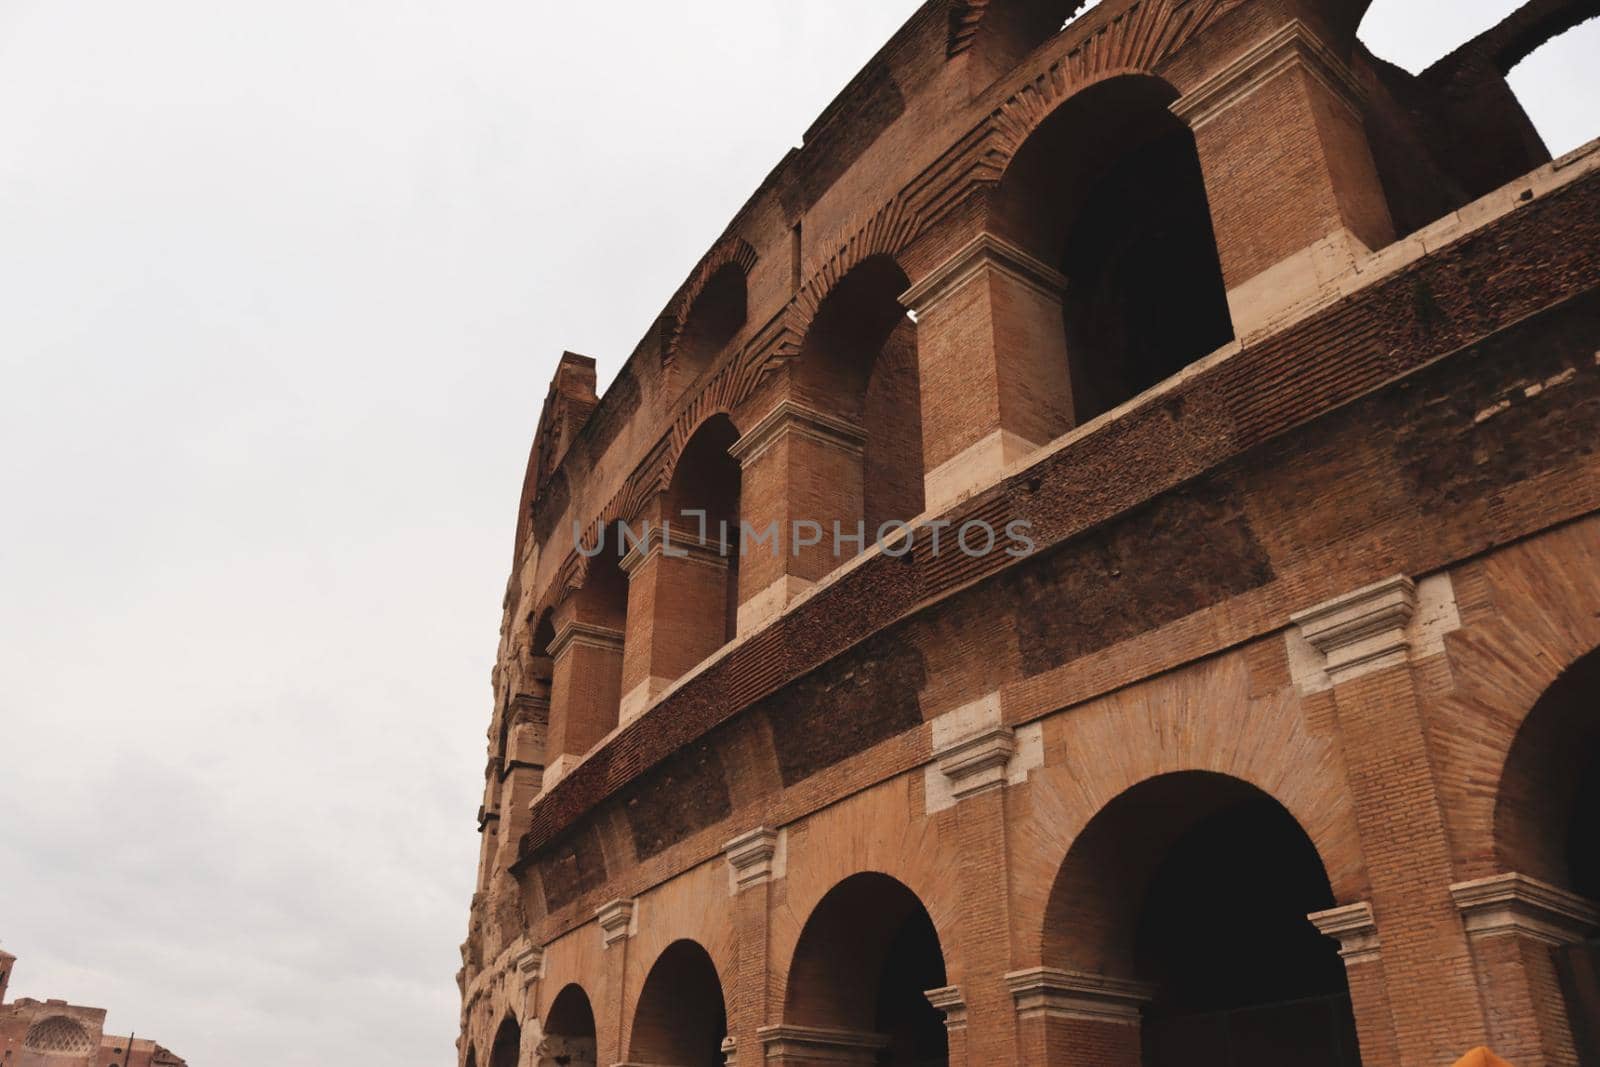 Rome, Italy in winter days by yohananegusse